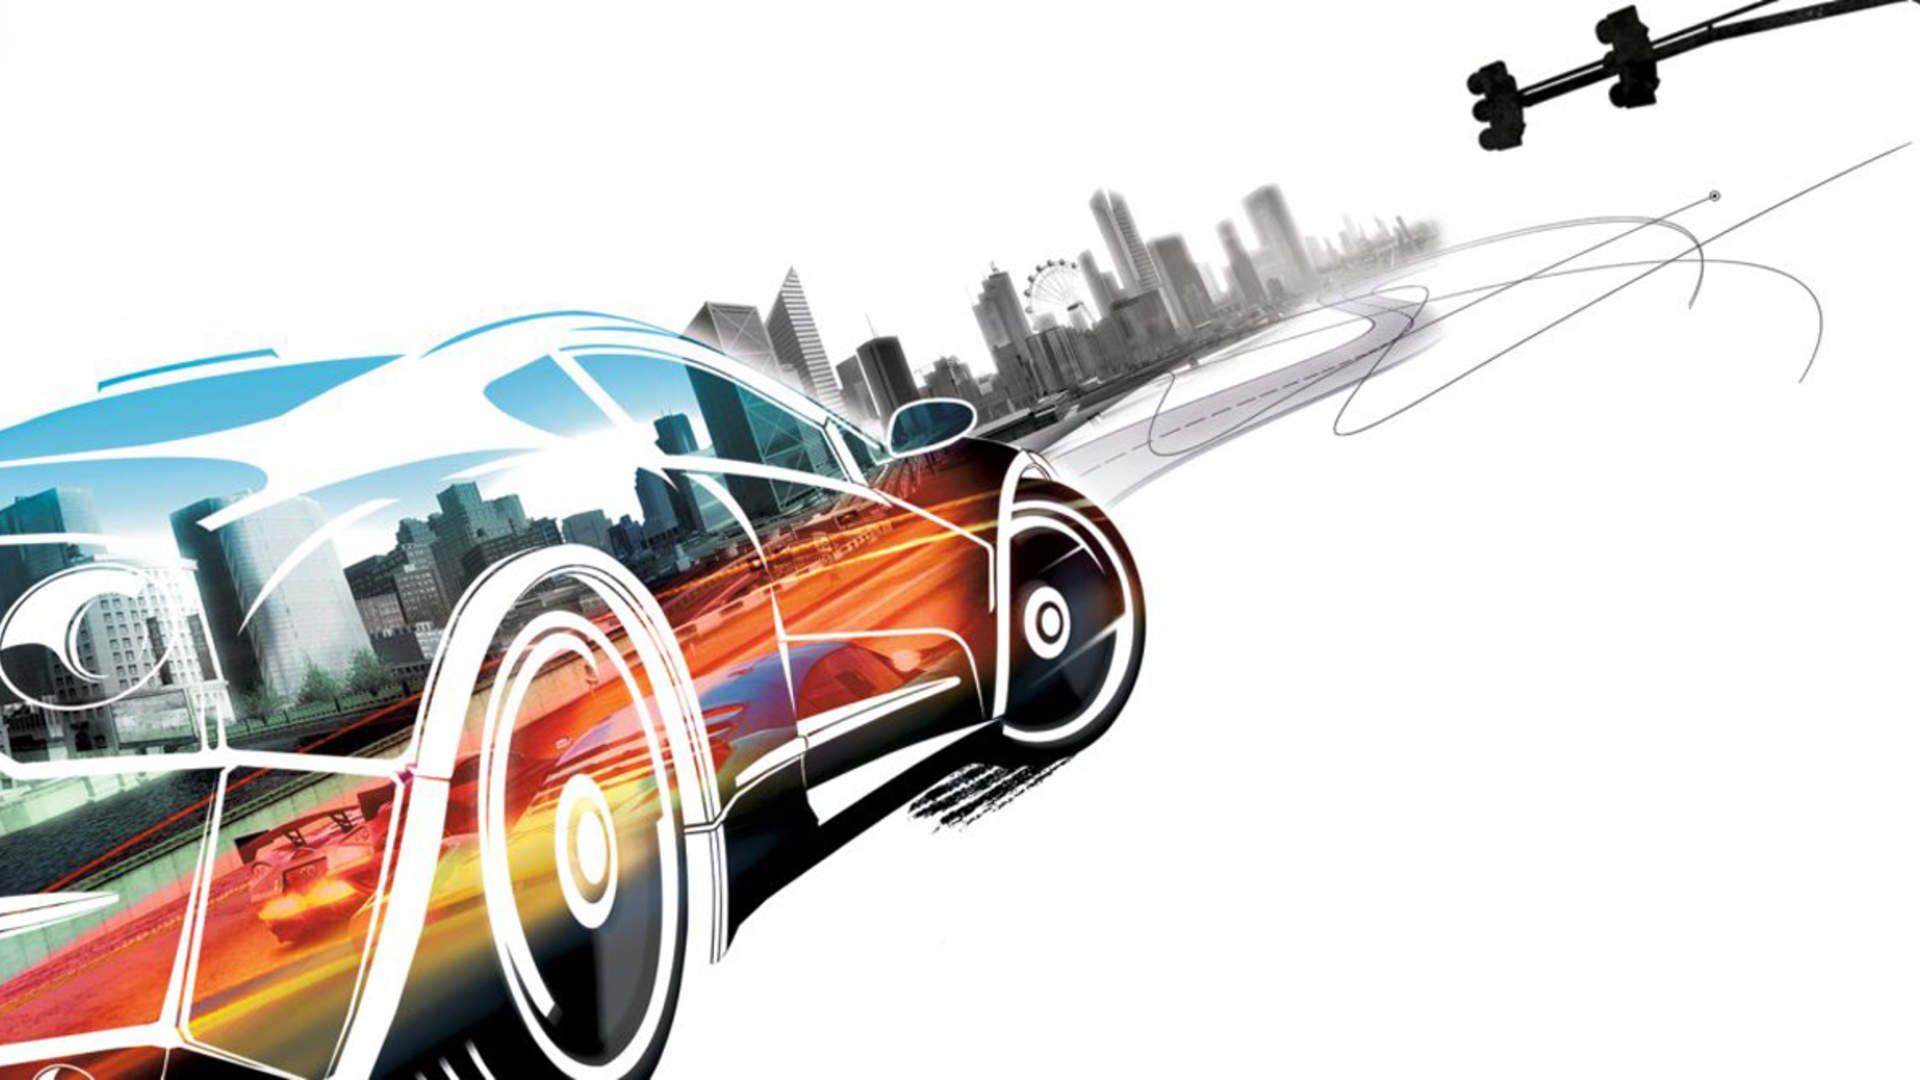 Burnout Paradise 10th Anniversary: Remembering Criterion's Race